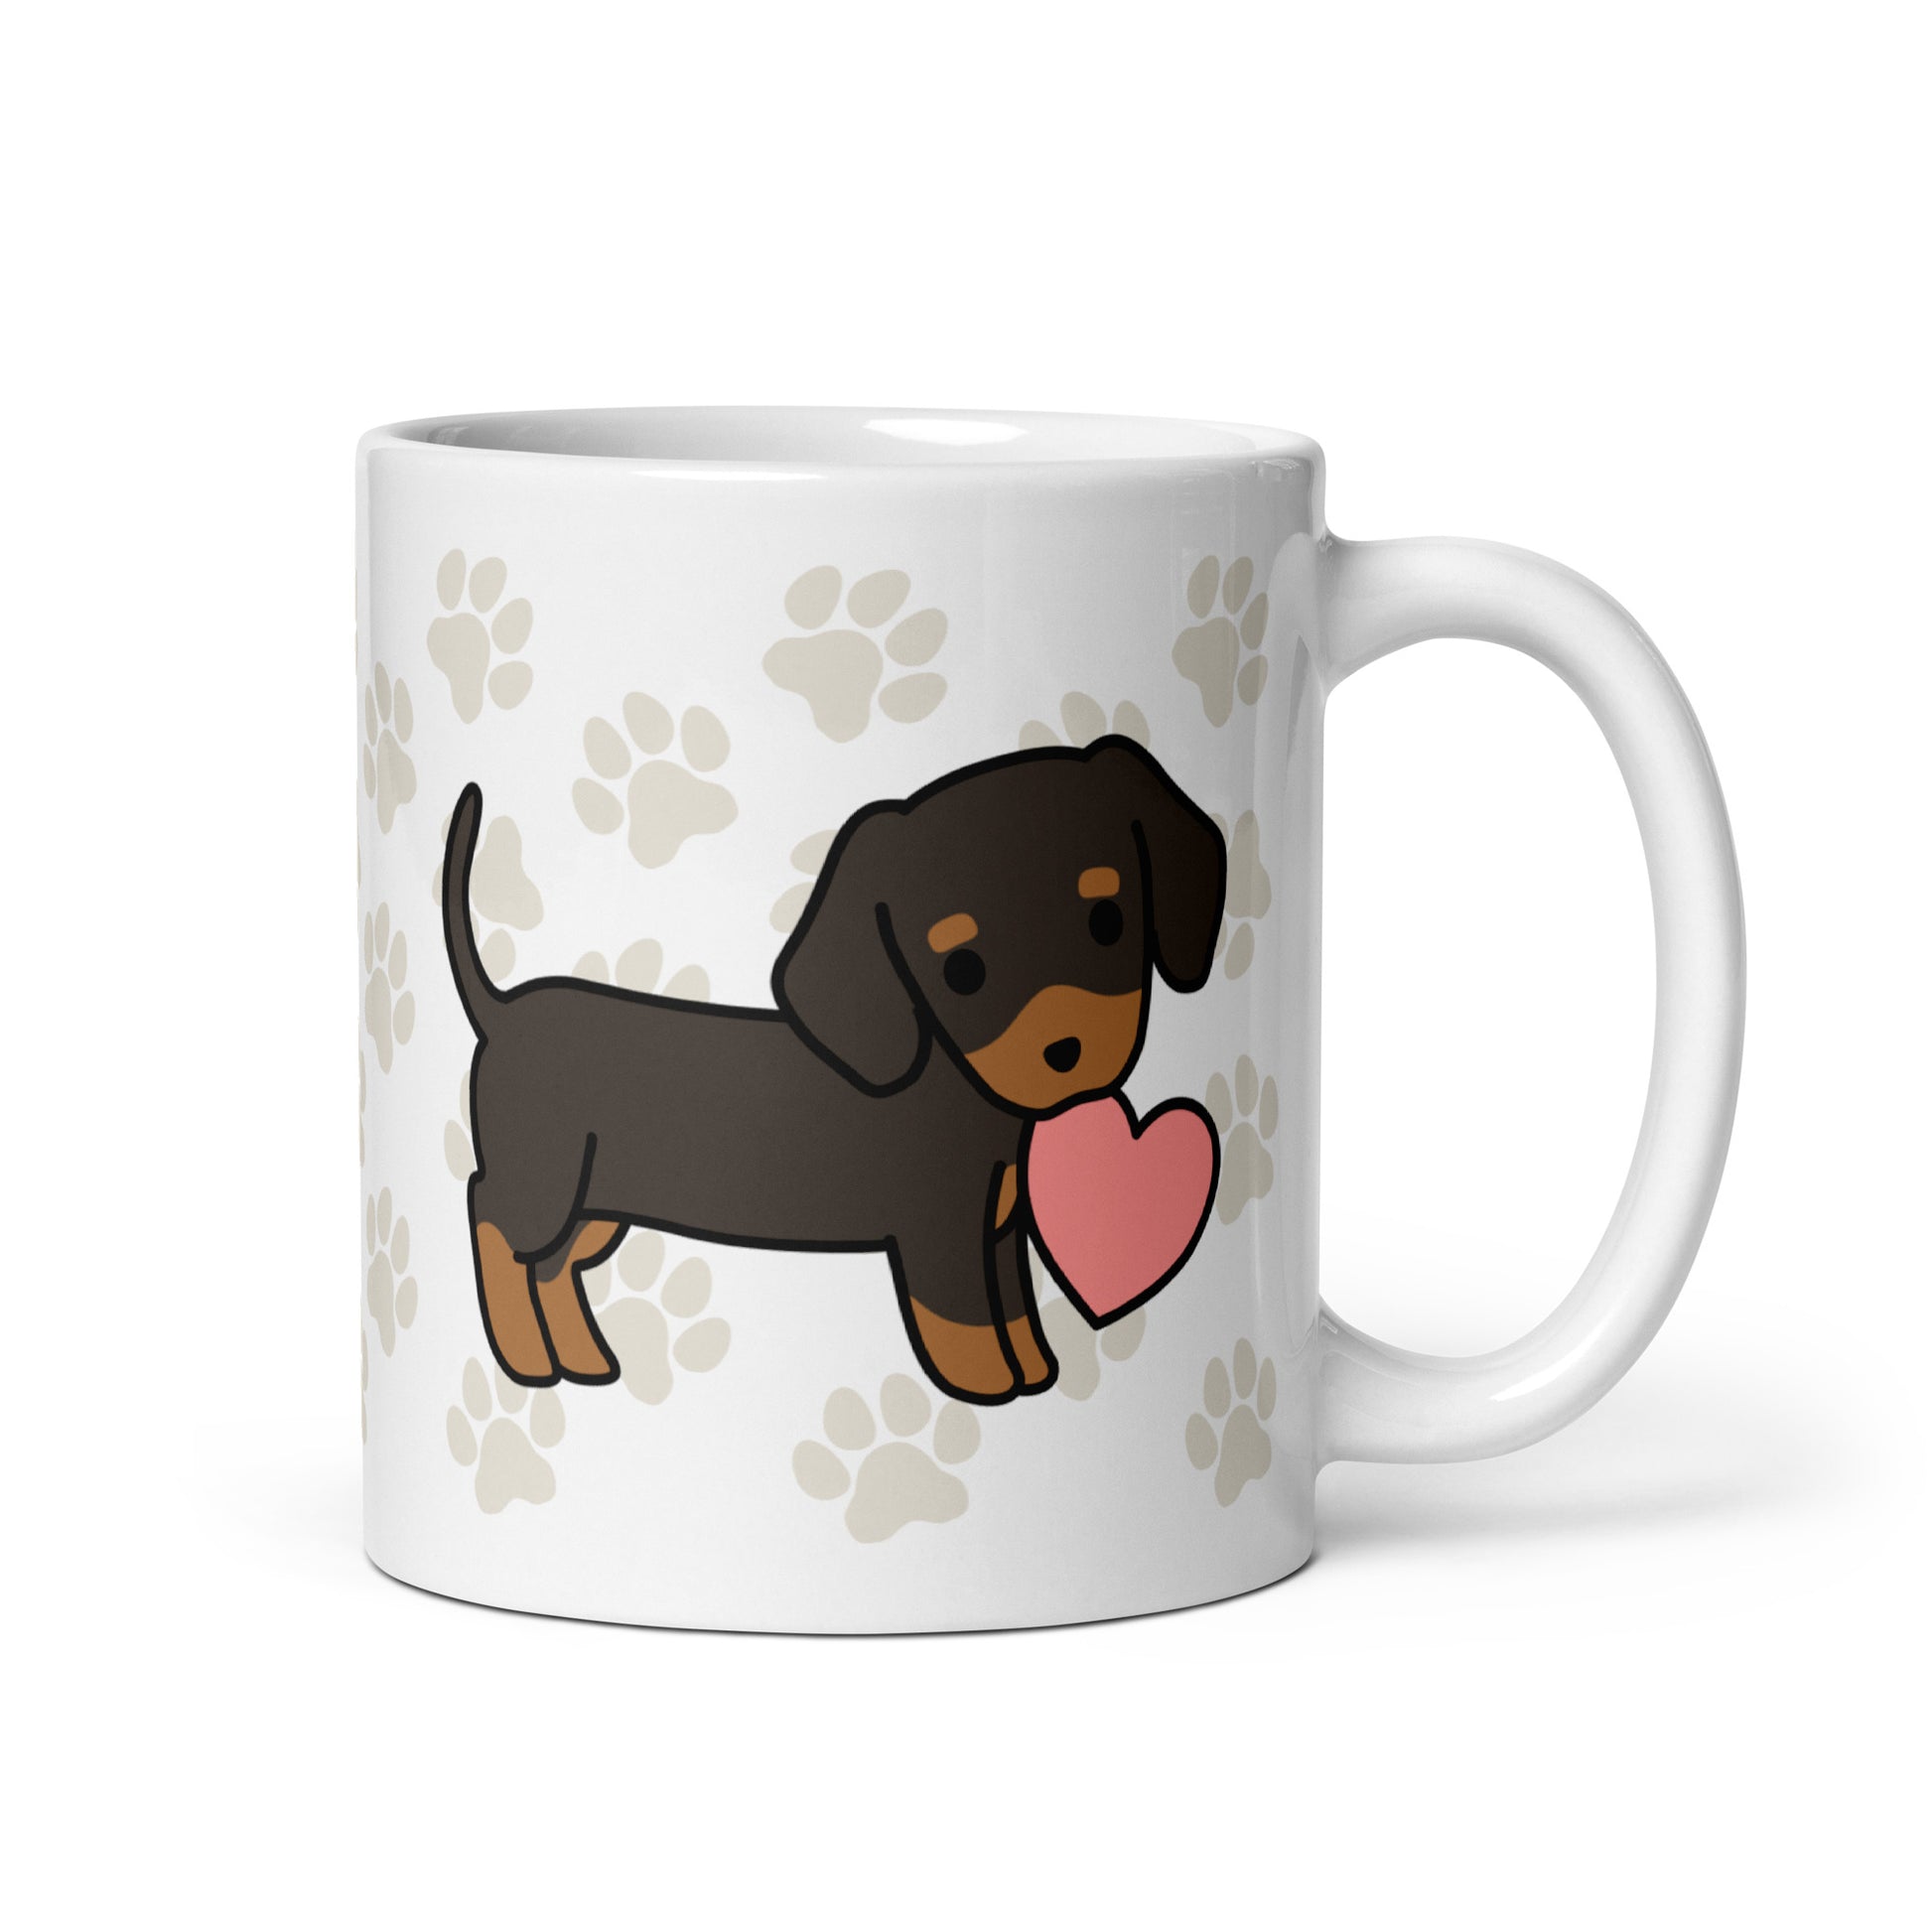 A white 11 ounce ceramic mug with a pattern of light brown pawprints all over. The mug also features a stylized illustration of a Dachshund holding a heart in its mouth.